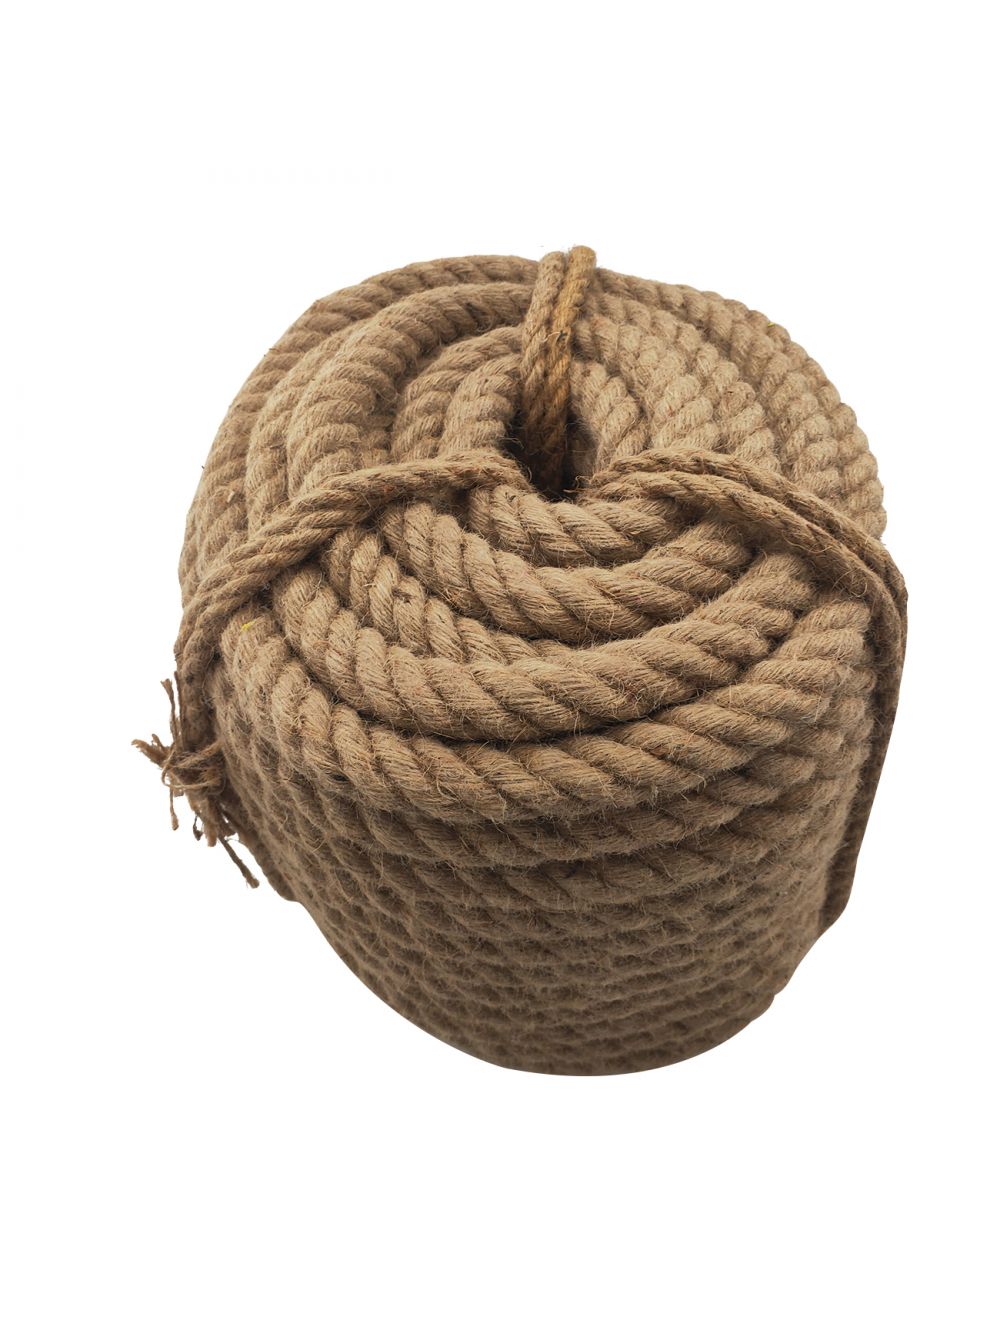 Dody Online Store Natural Jute Rope Burlap Hemp Twine Hessian Cord 30mm  Thick 50m long Local Pickup, Local Shop, Drop Shipping